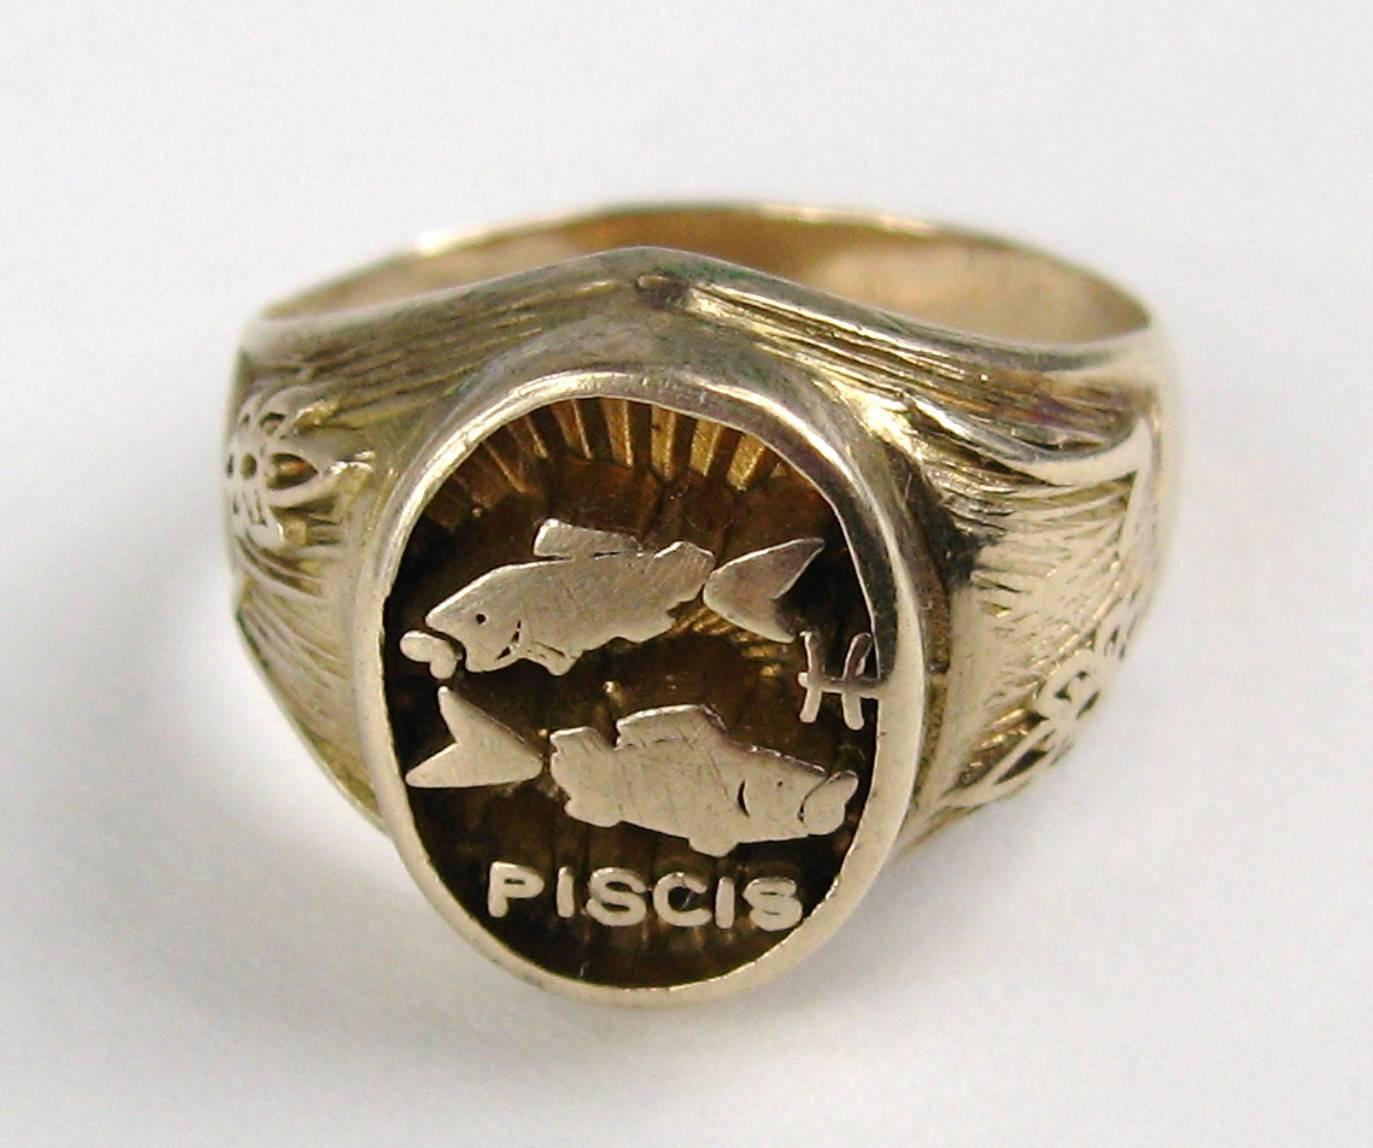 Astrology sign Pisces ring in Spanish
14K Gold 
Ring is a size 7.5
This can be sized by your jeweler or us, please contact for information 
Any questions please call or hit request more information  
